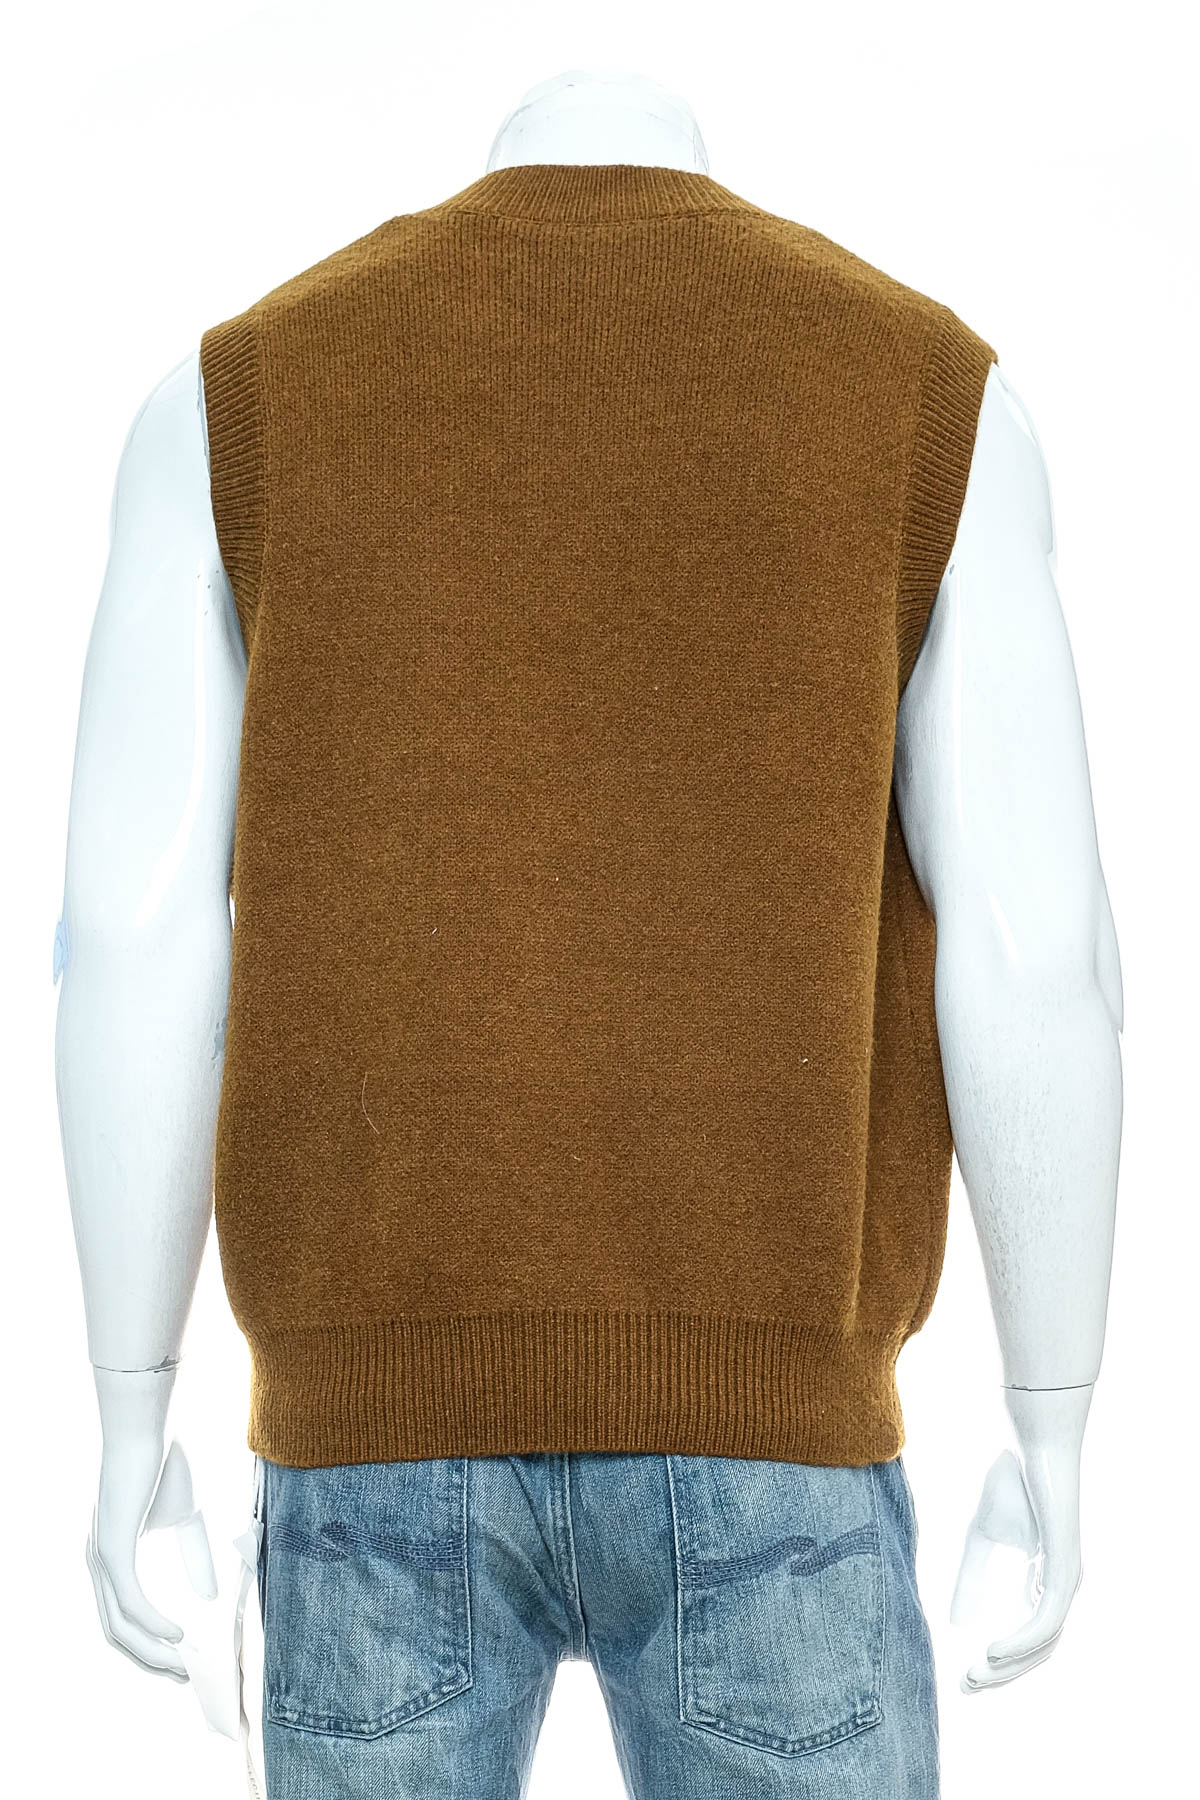 Men's sweater - Dh.affection - 1